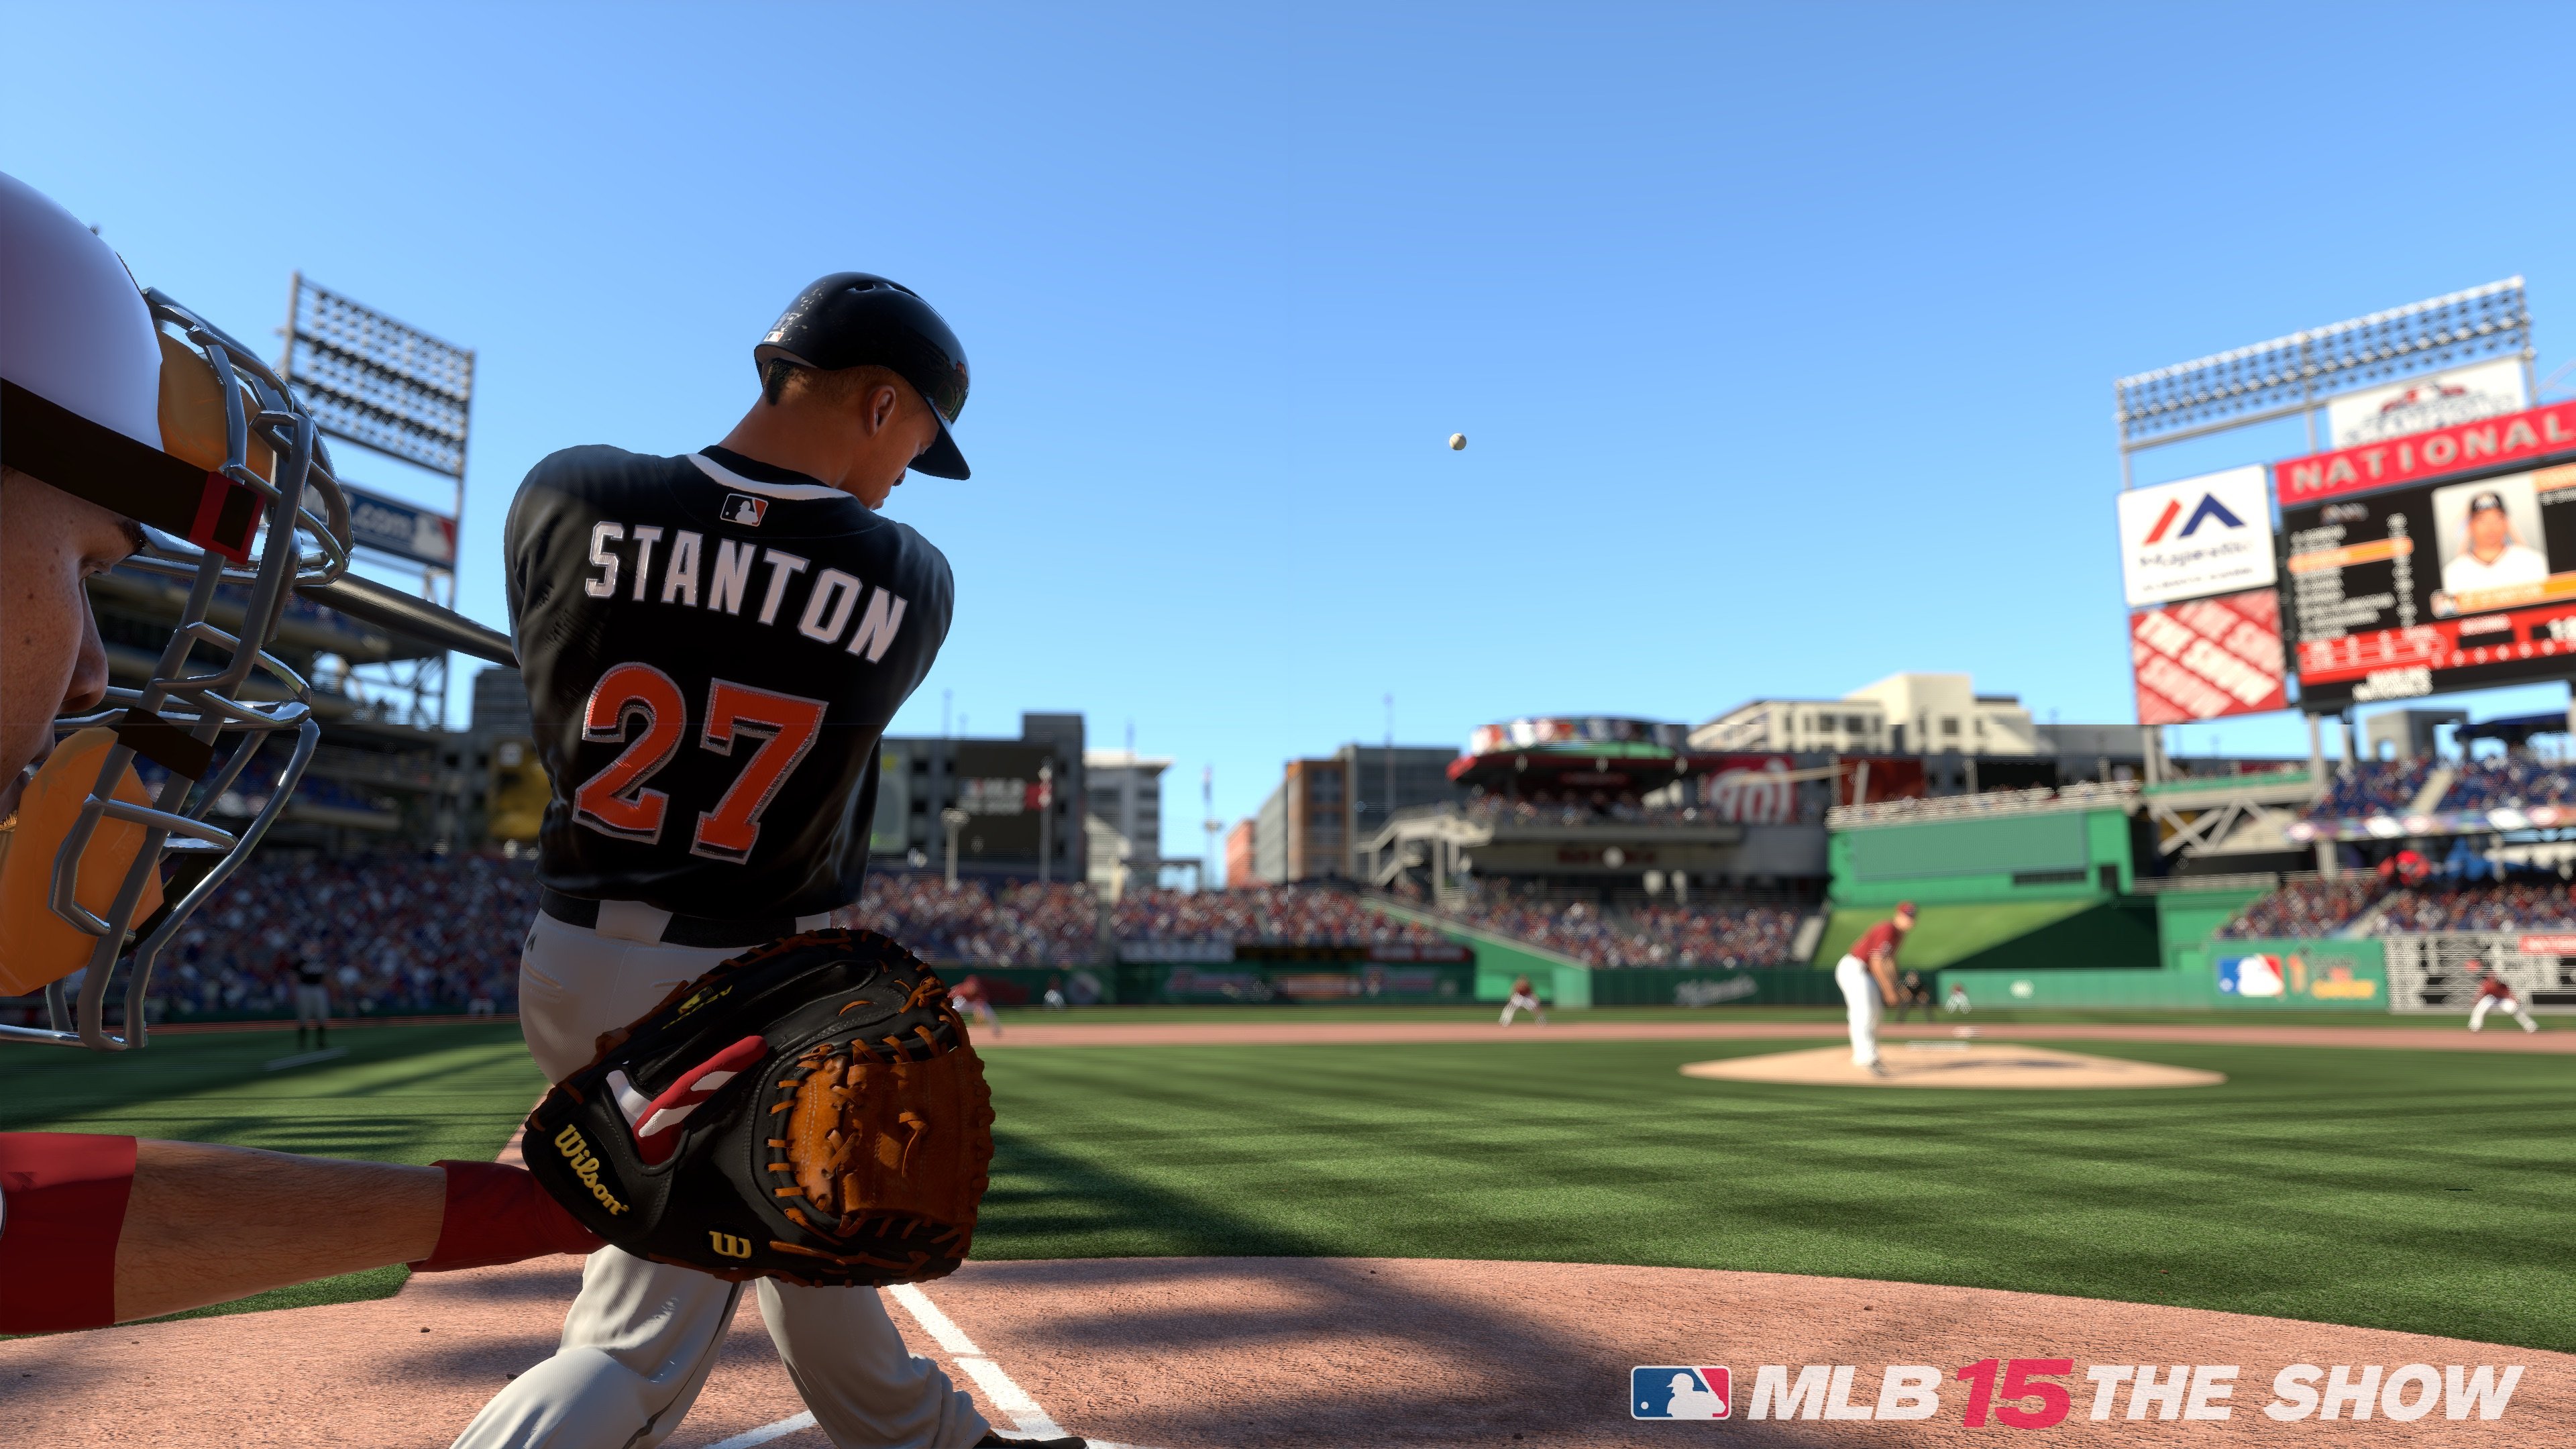 What you need to know about the MLB 15 The Show release right now.